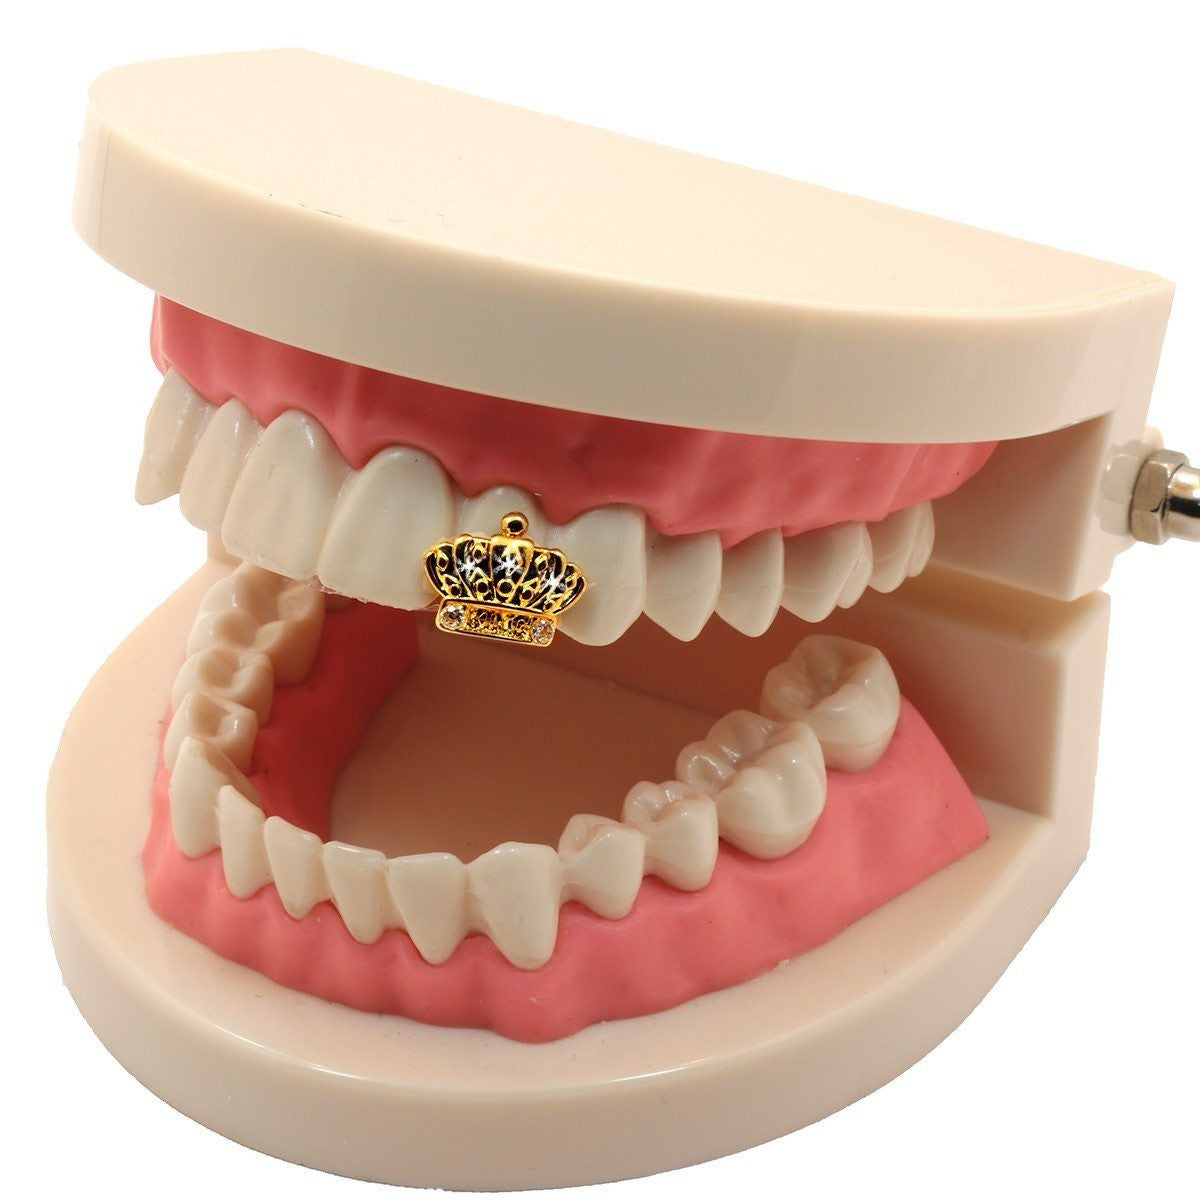 GOLD GRILLZ SINGLE TOOTH CROWN